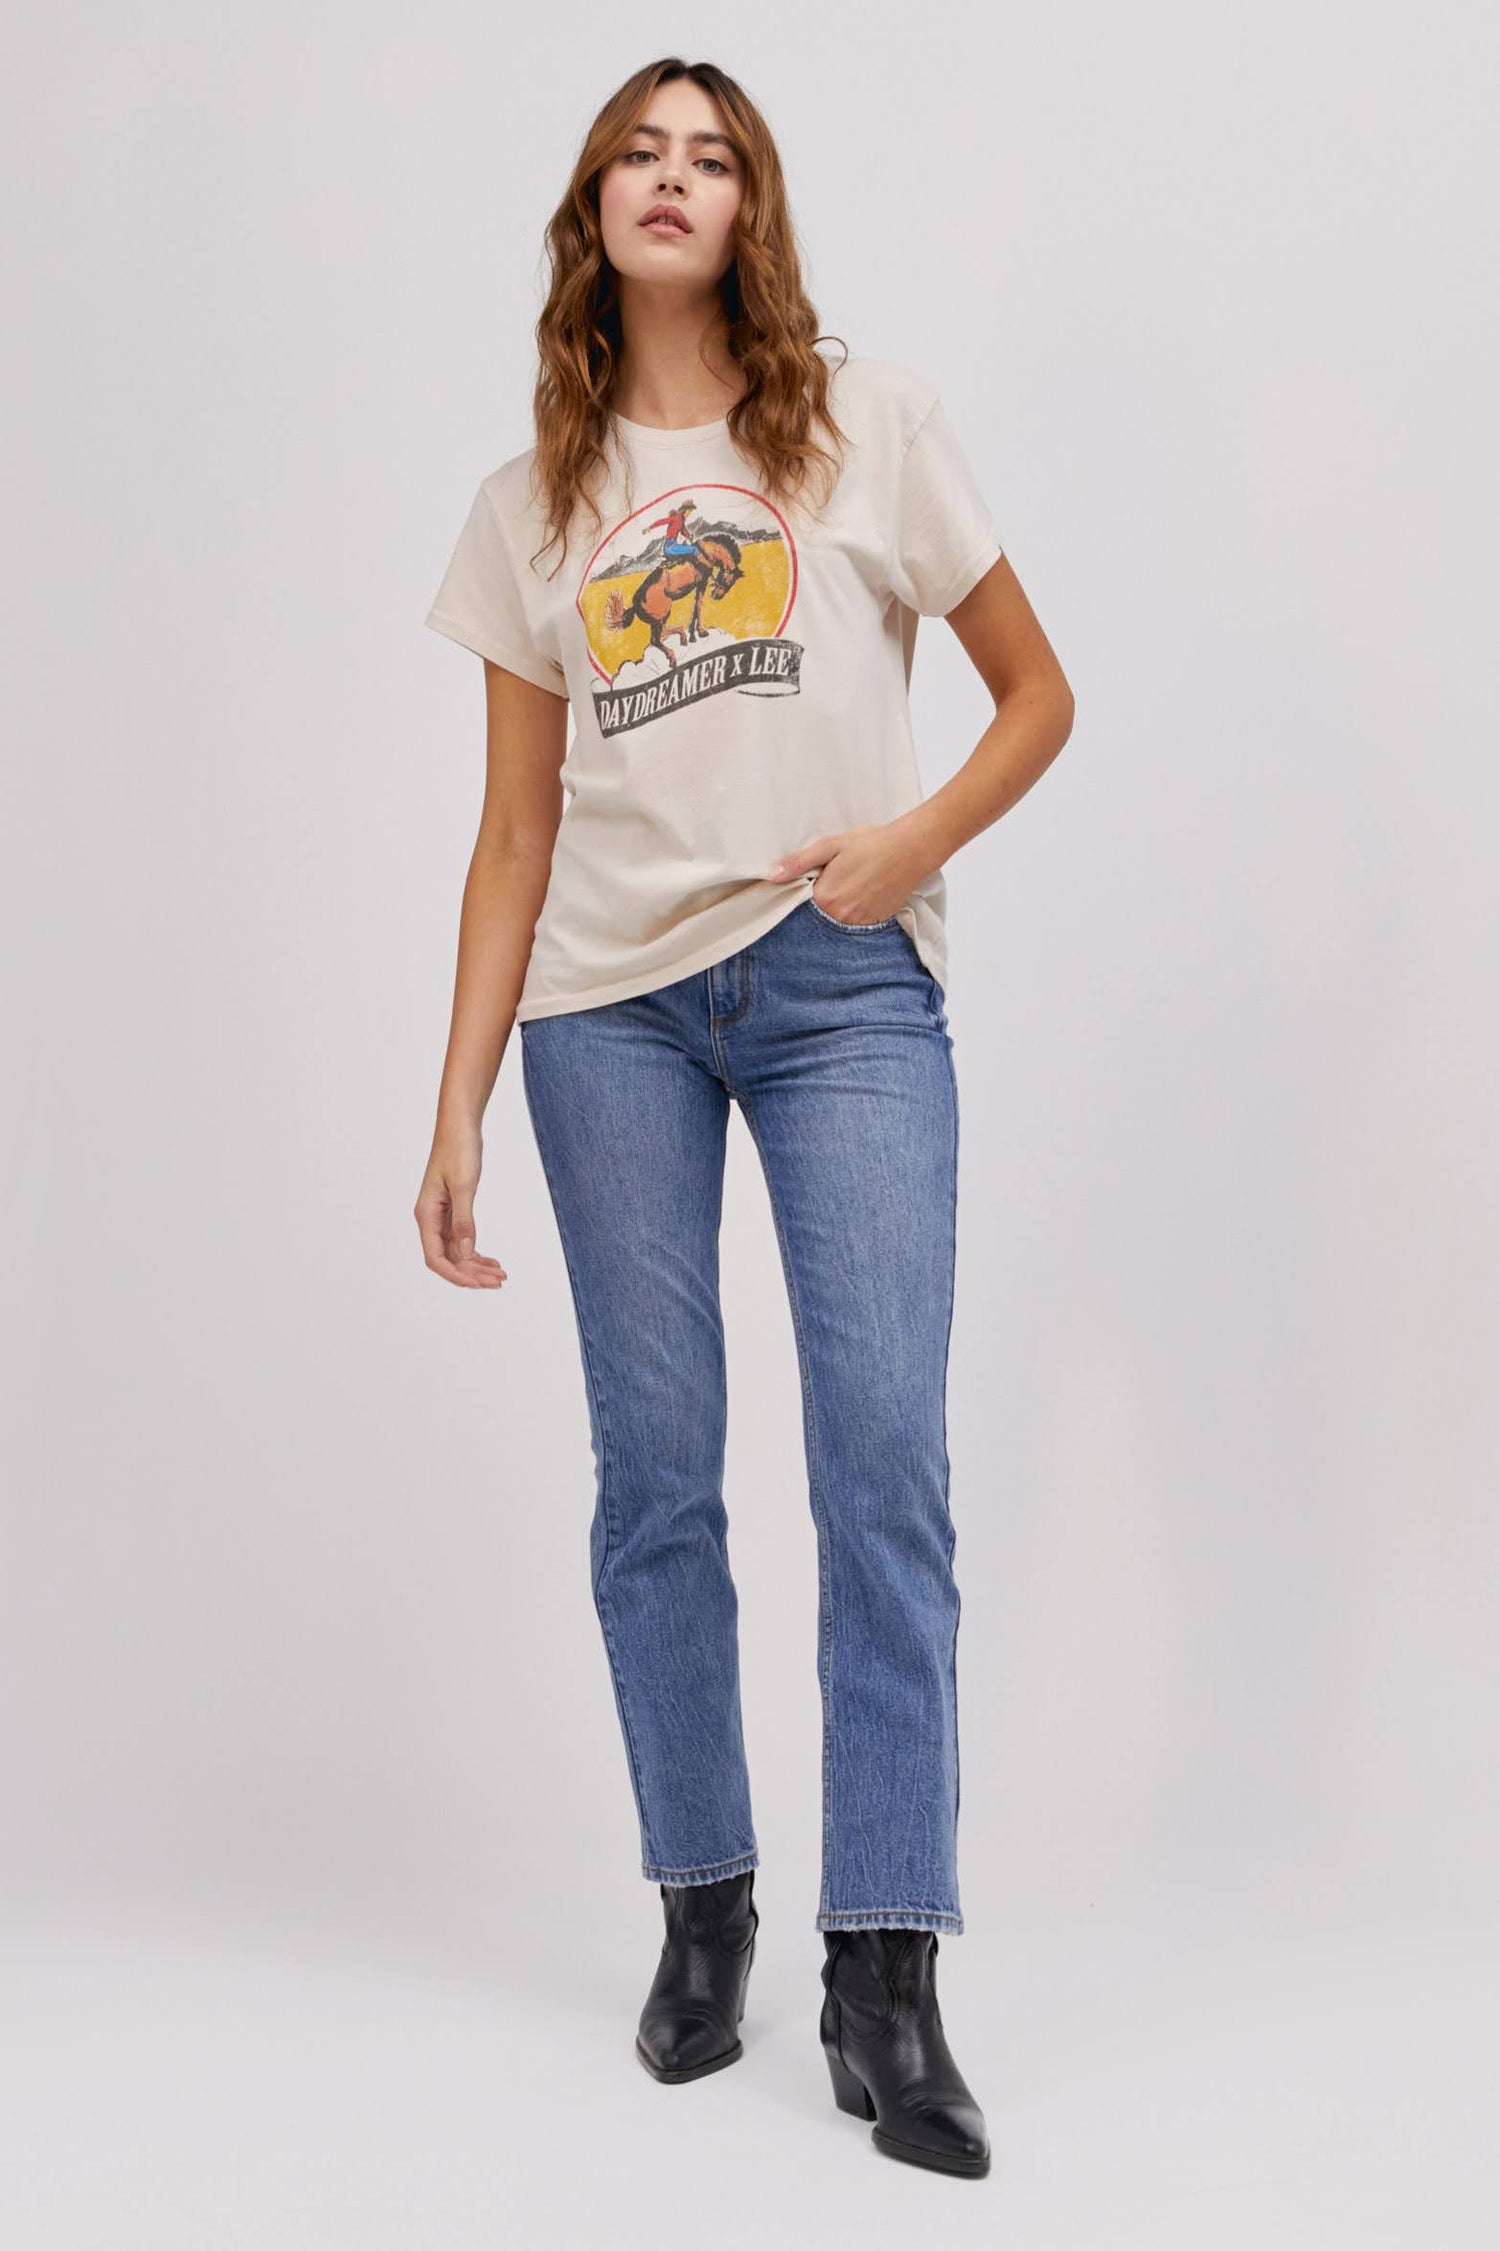 A curly-haired model featuring a white tour tee designed with a fresh rendition of a tried and true Lee vintage rodeo graphic hits a relaxed fit, Tour Tee.